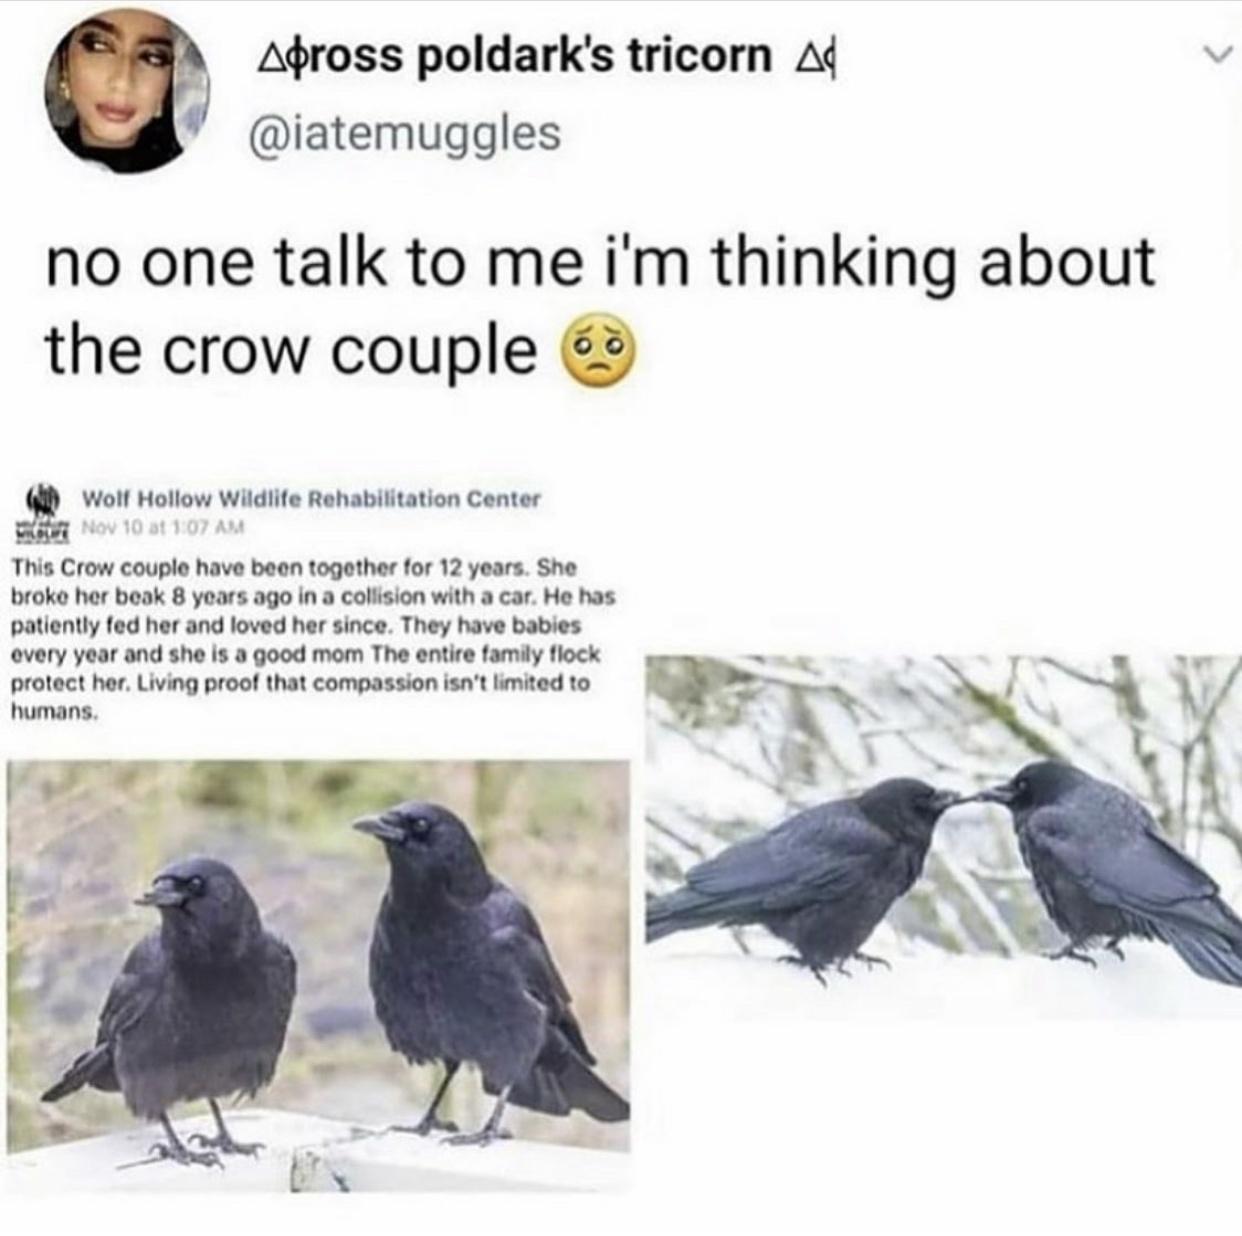 crow memes - Apross poldark's tricorn Ad no one talk to me i'm thinking about the crow couple Wolf Hollow Wildlife Rehabilitation Center Nov 10 at This Crow couple have been together for 12 years. She broke her beak 8 years ago in a collision with a car. 